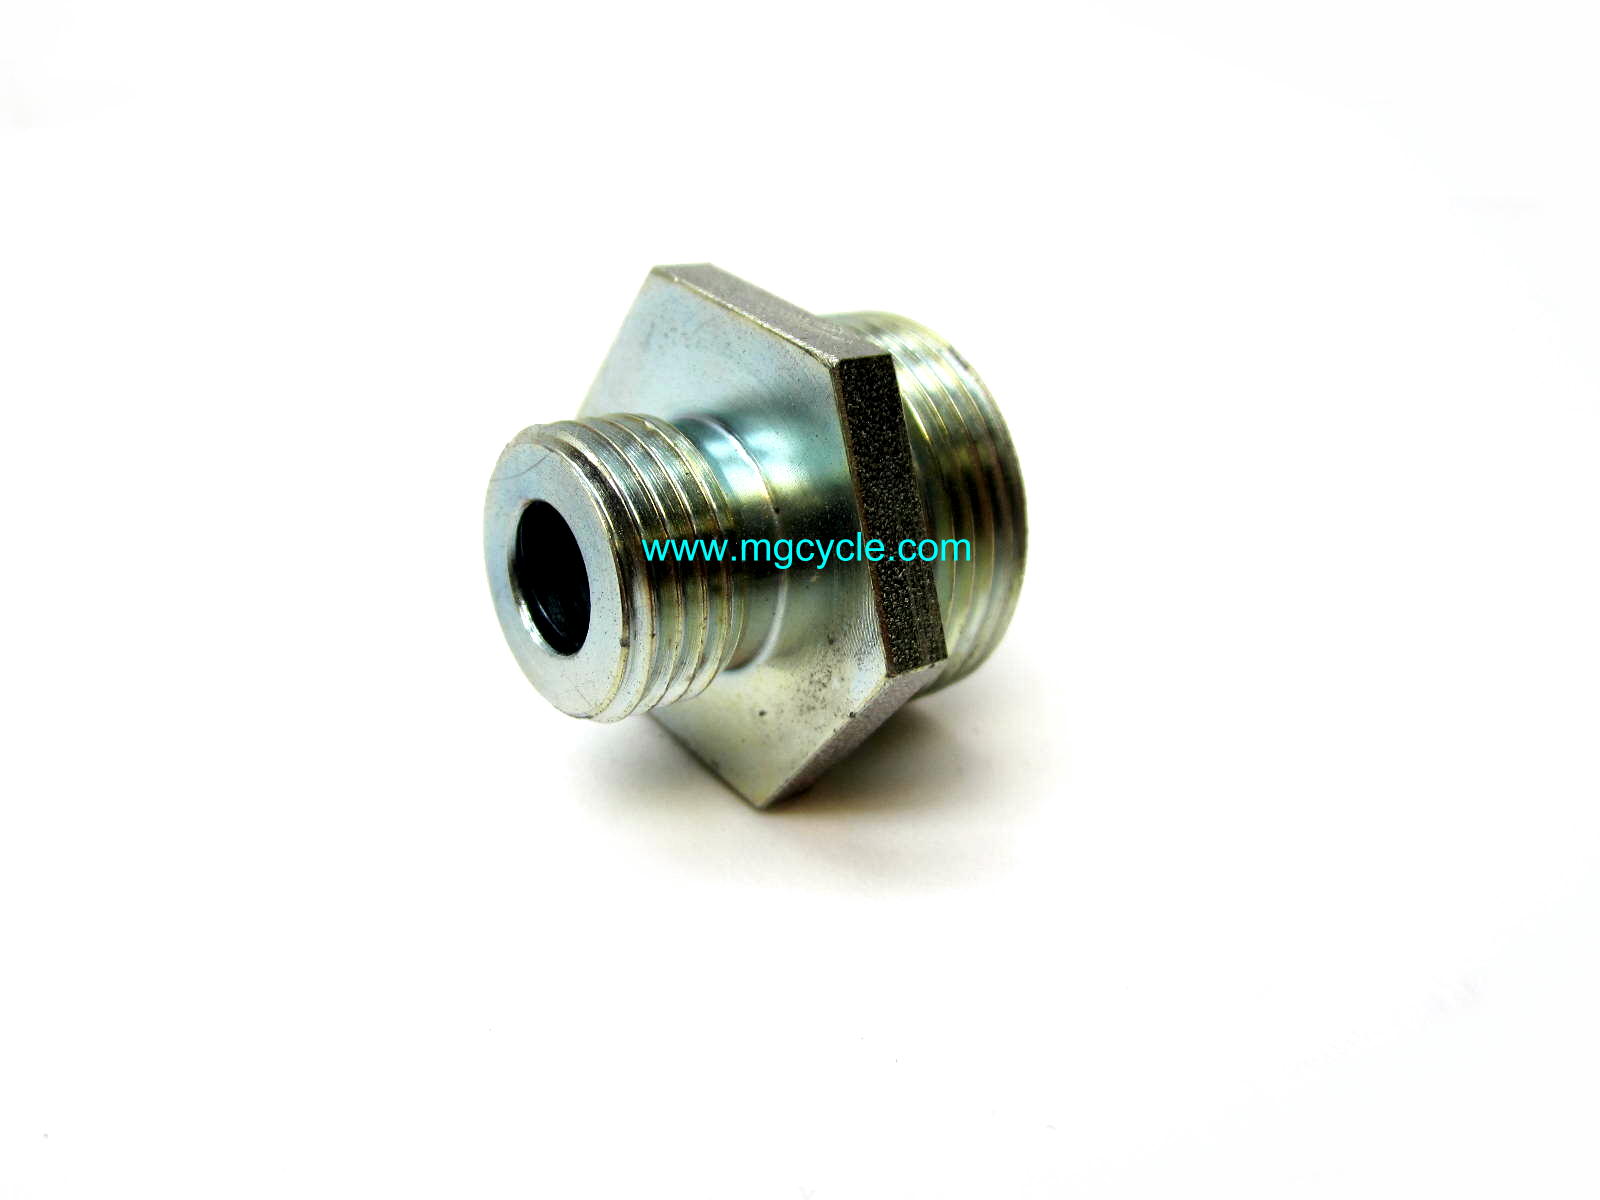 Oil filter threaded adapter 1975-1993 big twins GU14003800 - Click Image to Close